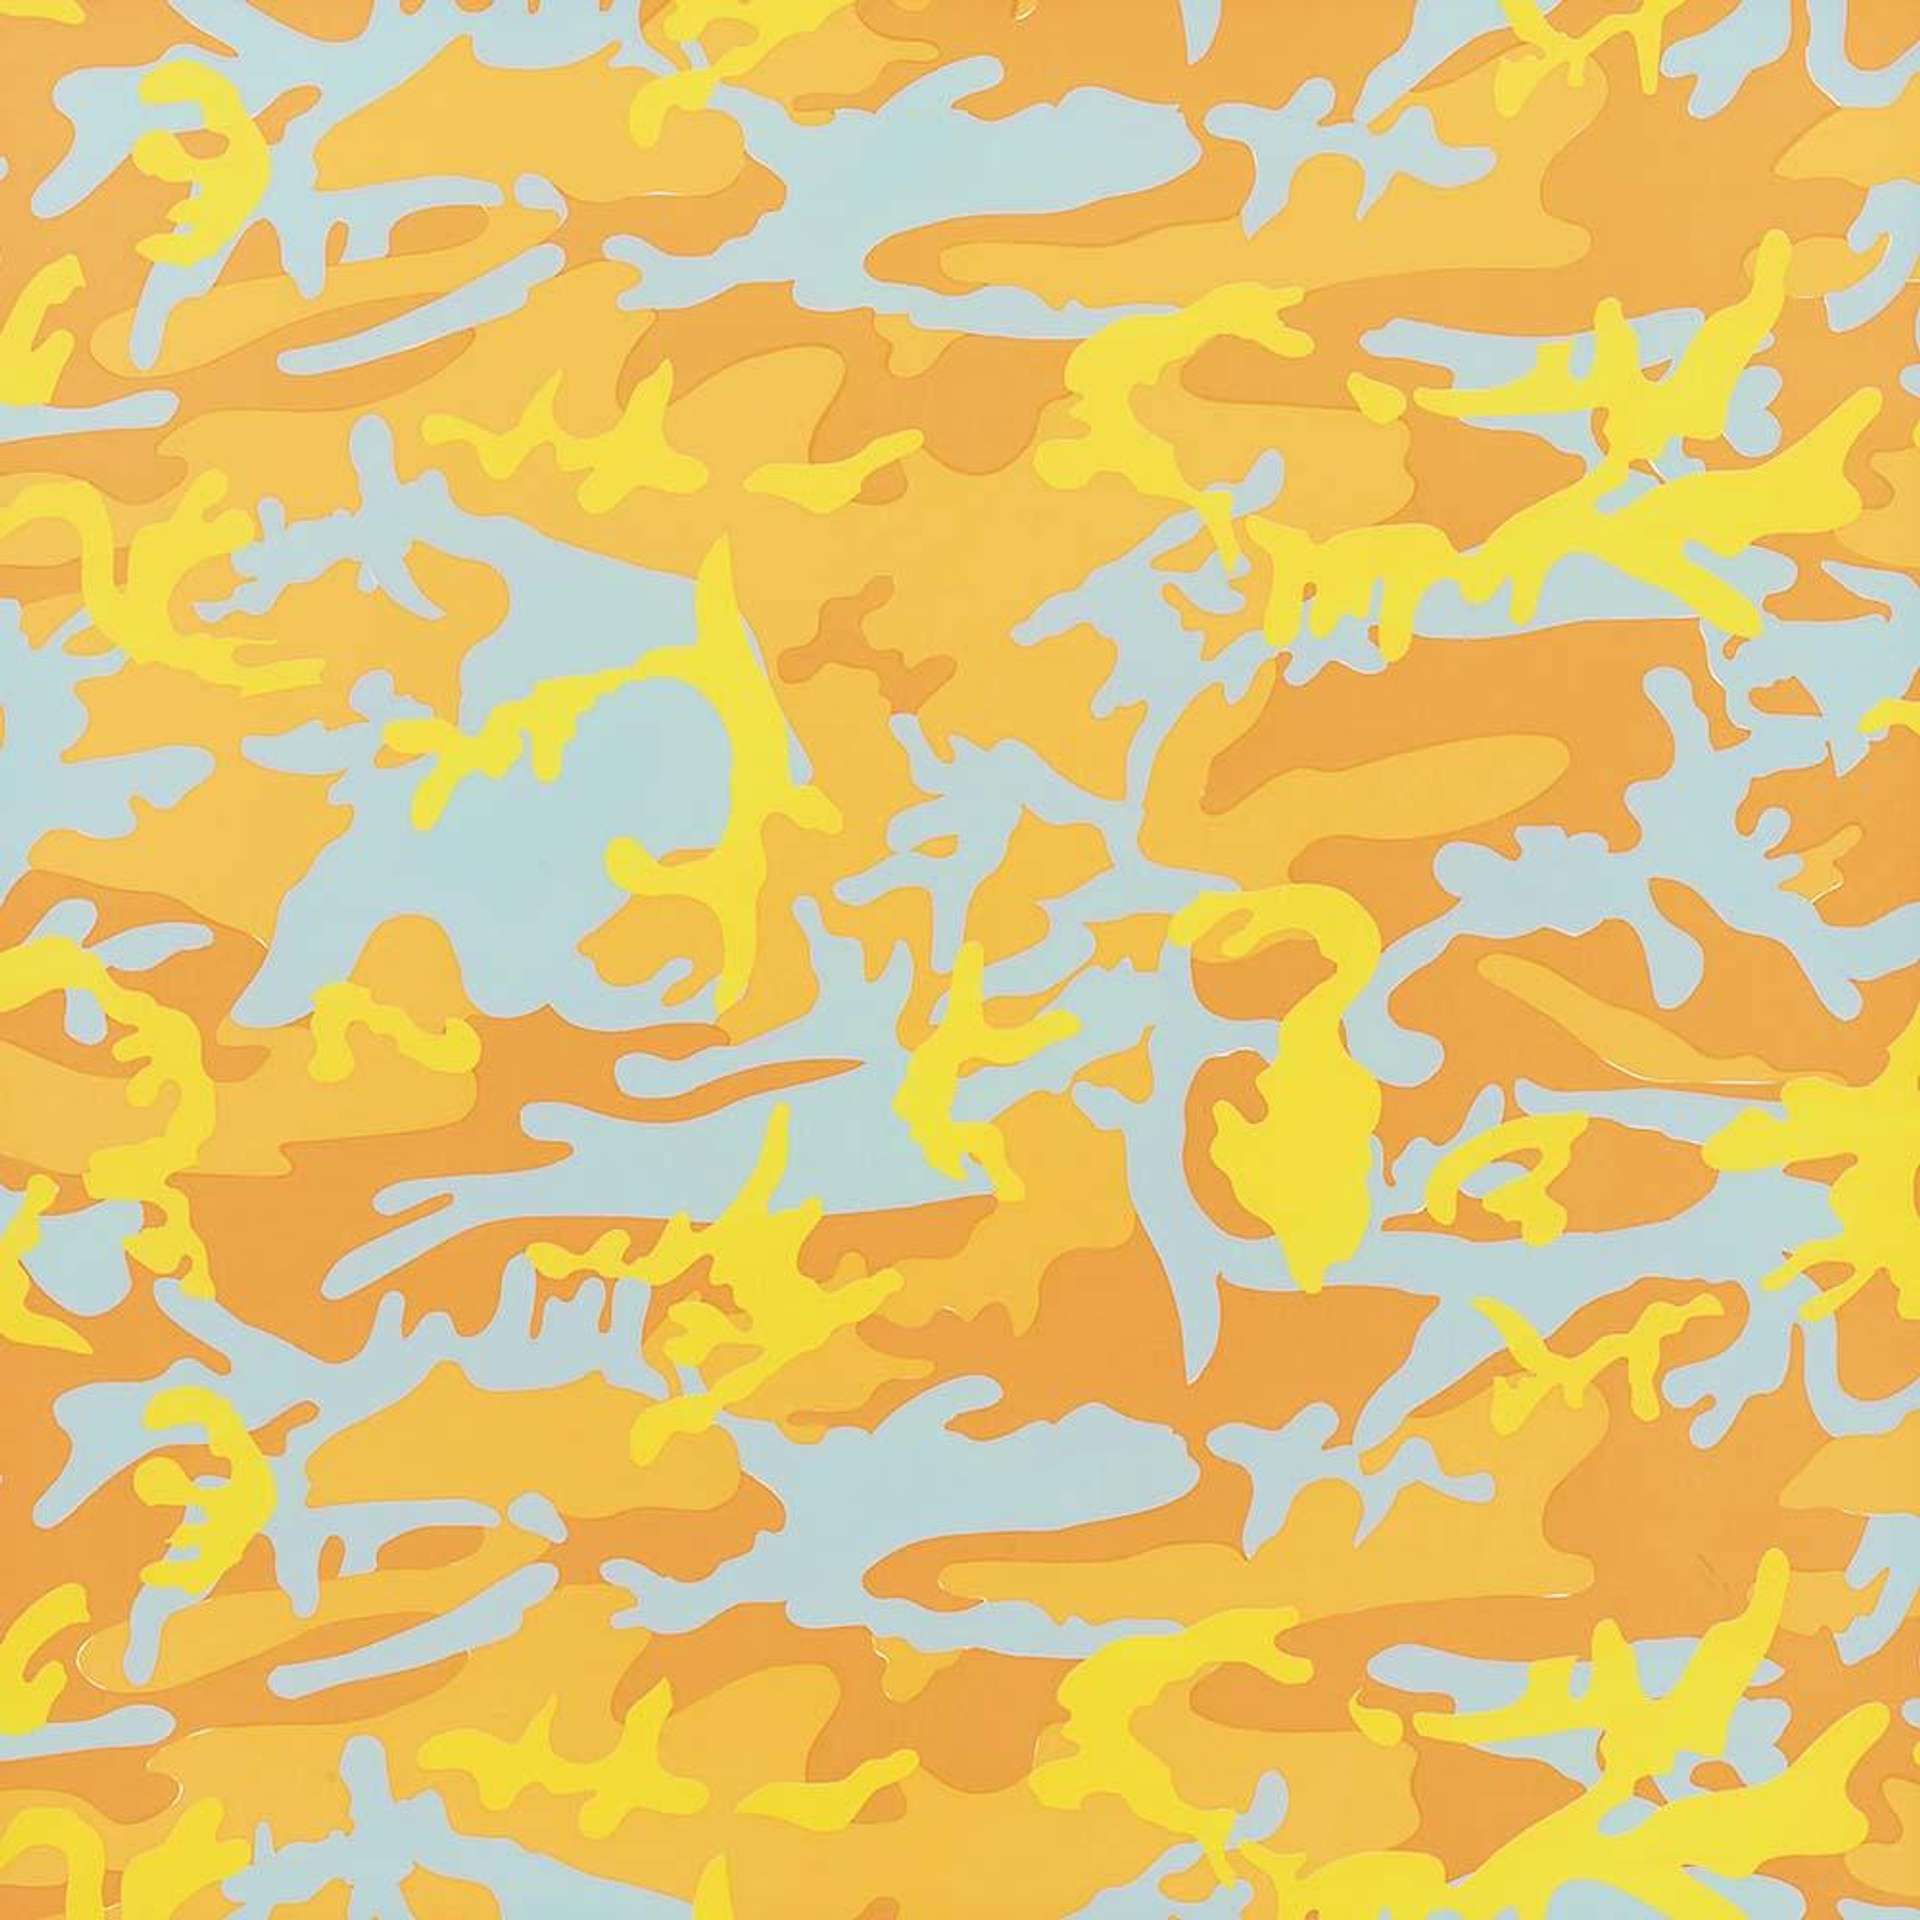 Camouflage (F. & S. II.413) by Andy Warhol